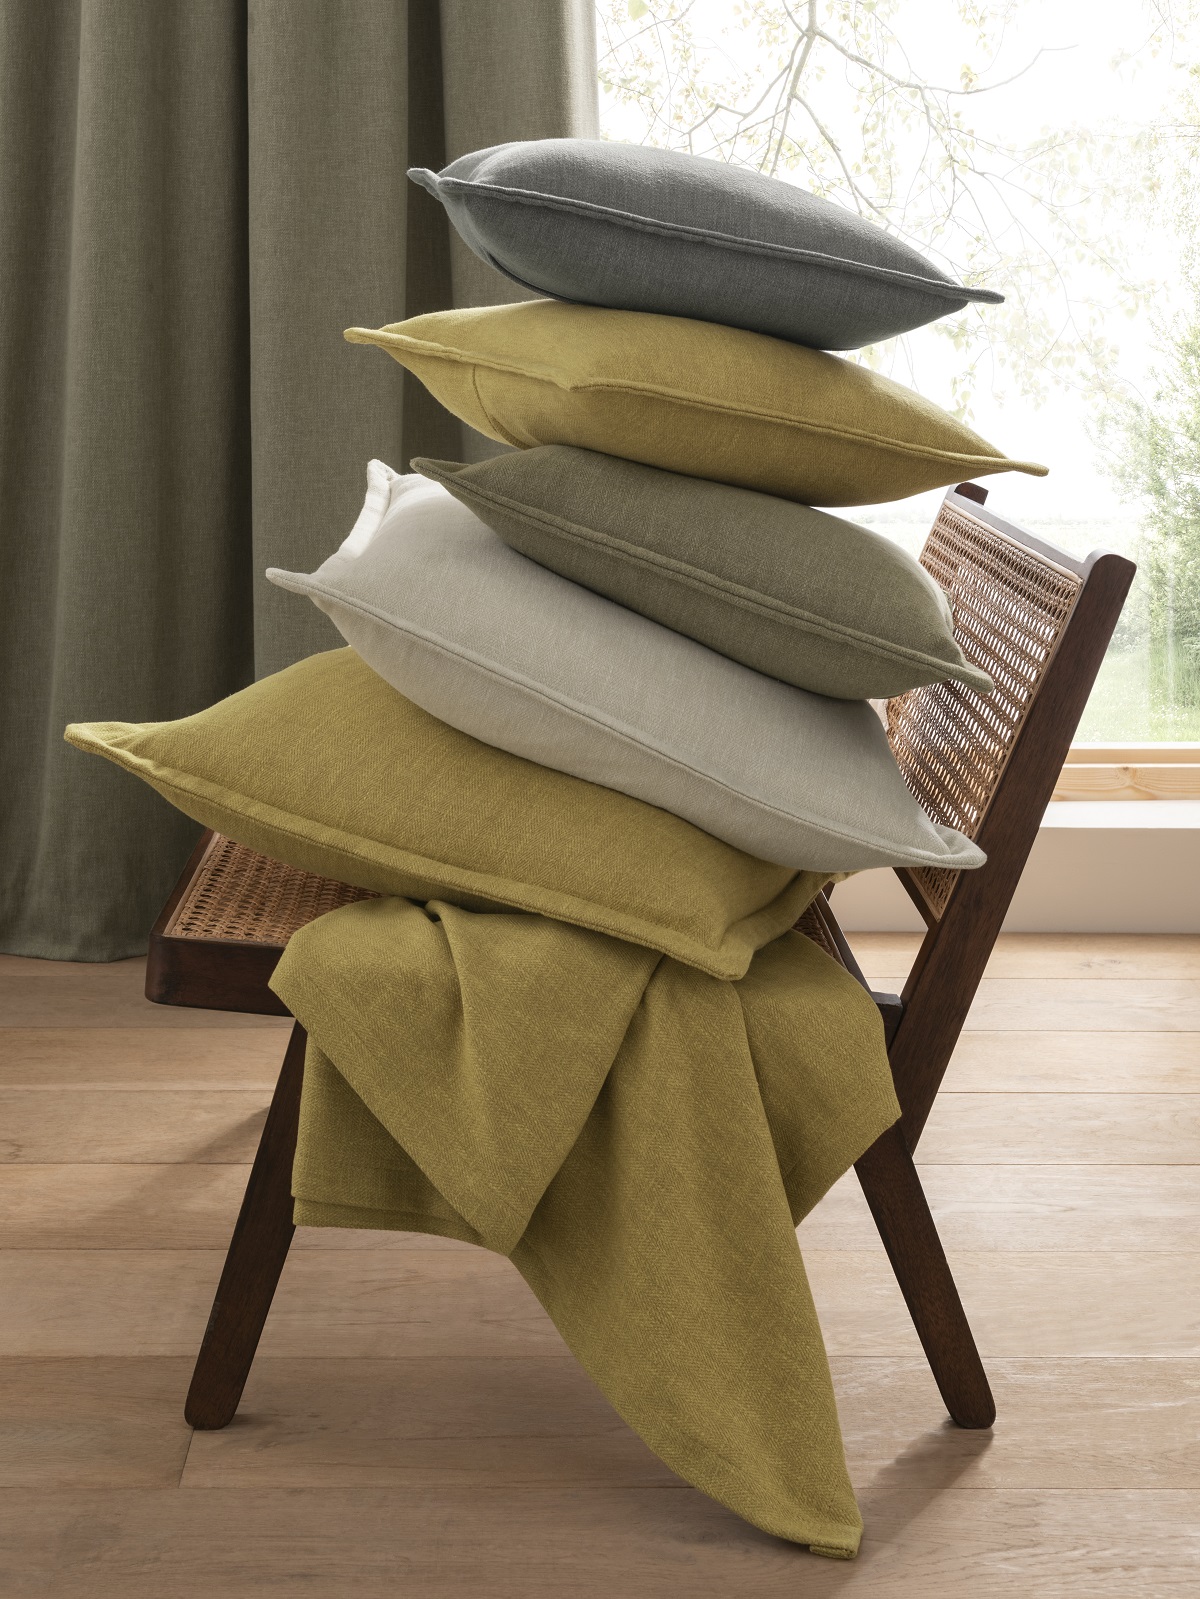 cushions in Orla fabric in natural shades of green